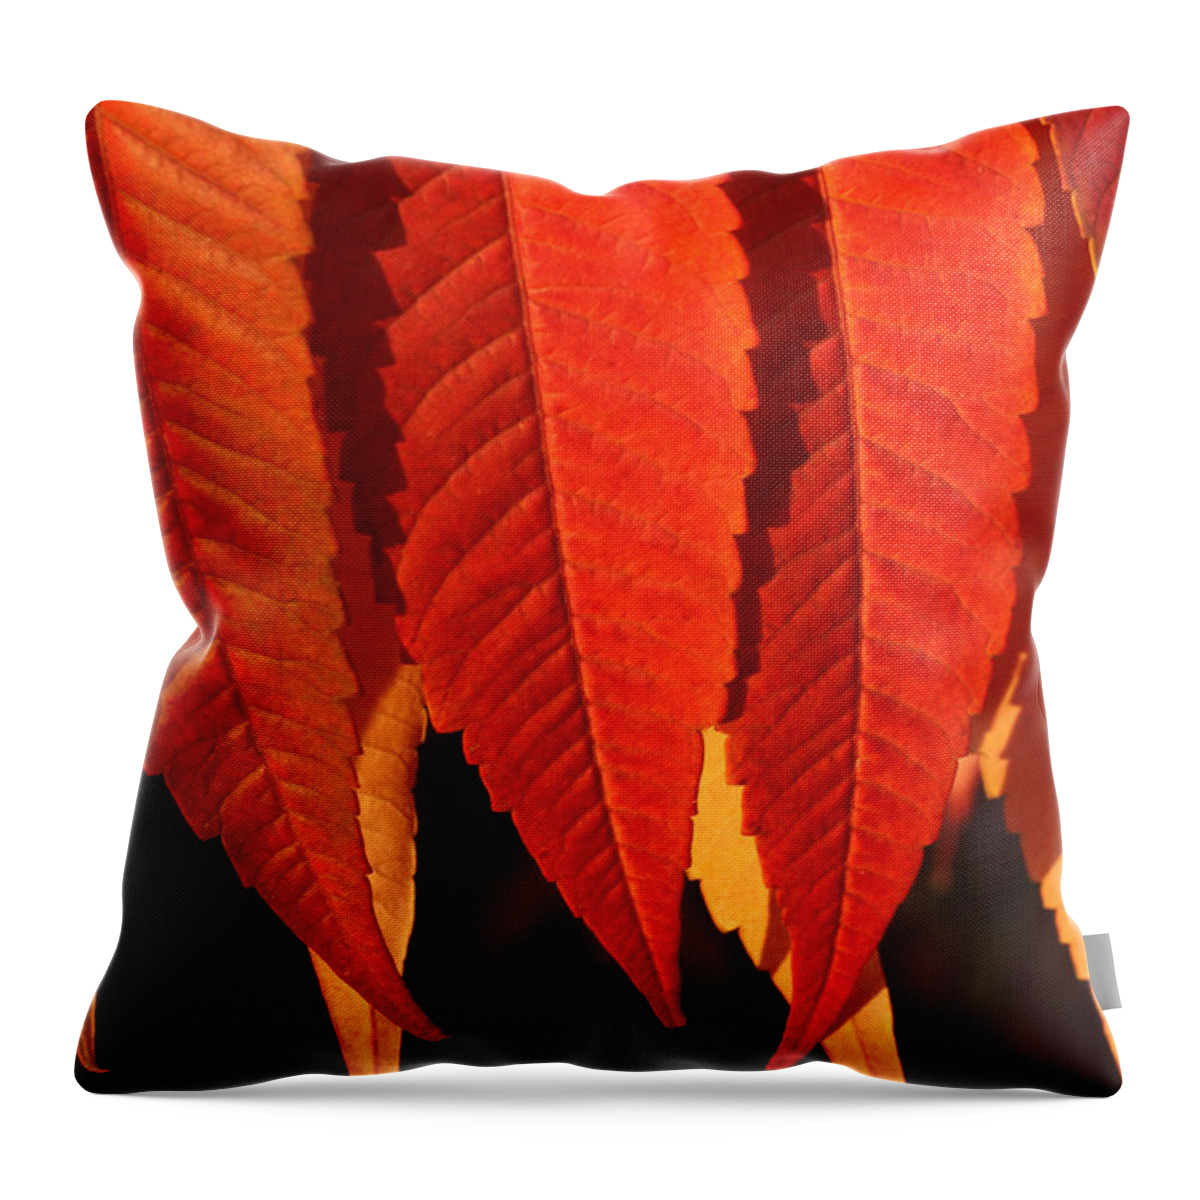 Connie Handscomb Throw Pillow featuring the photograph Leafy Valance by Connie Handscomb